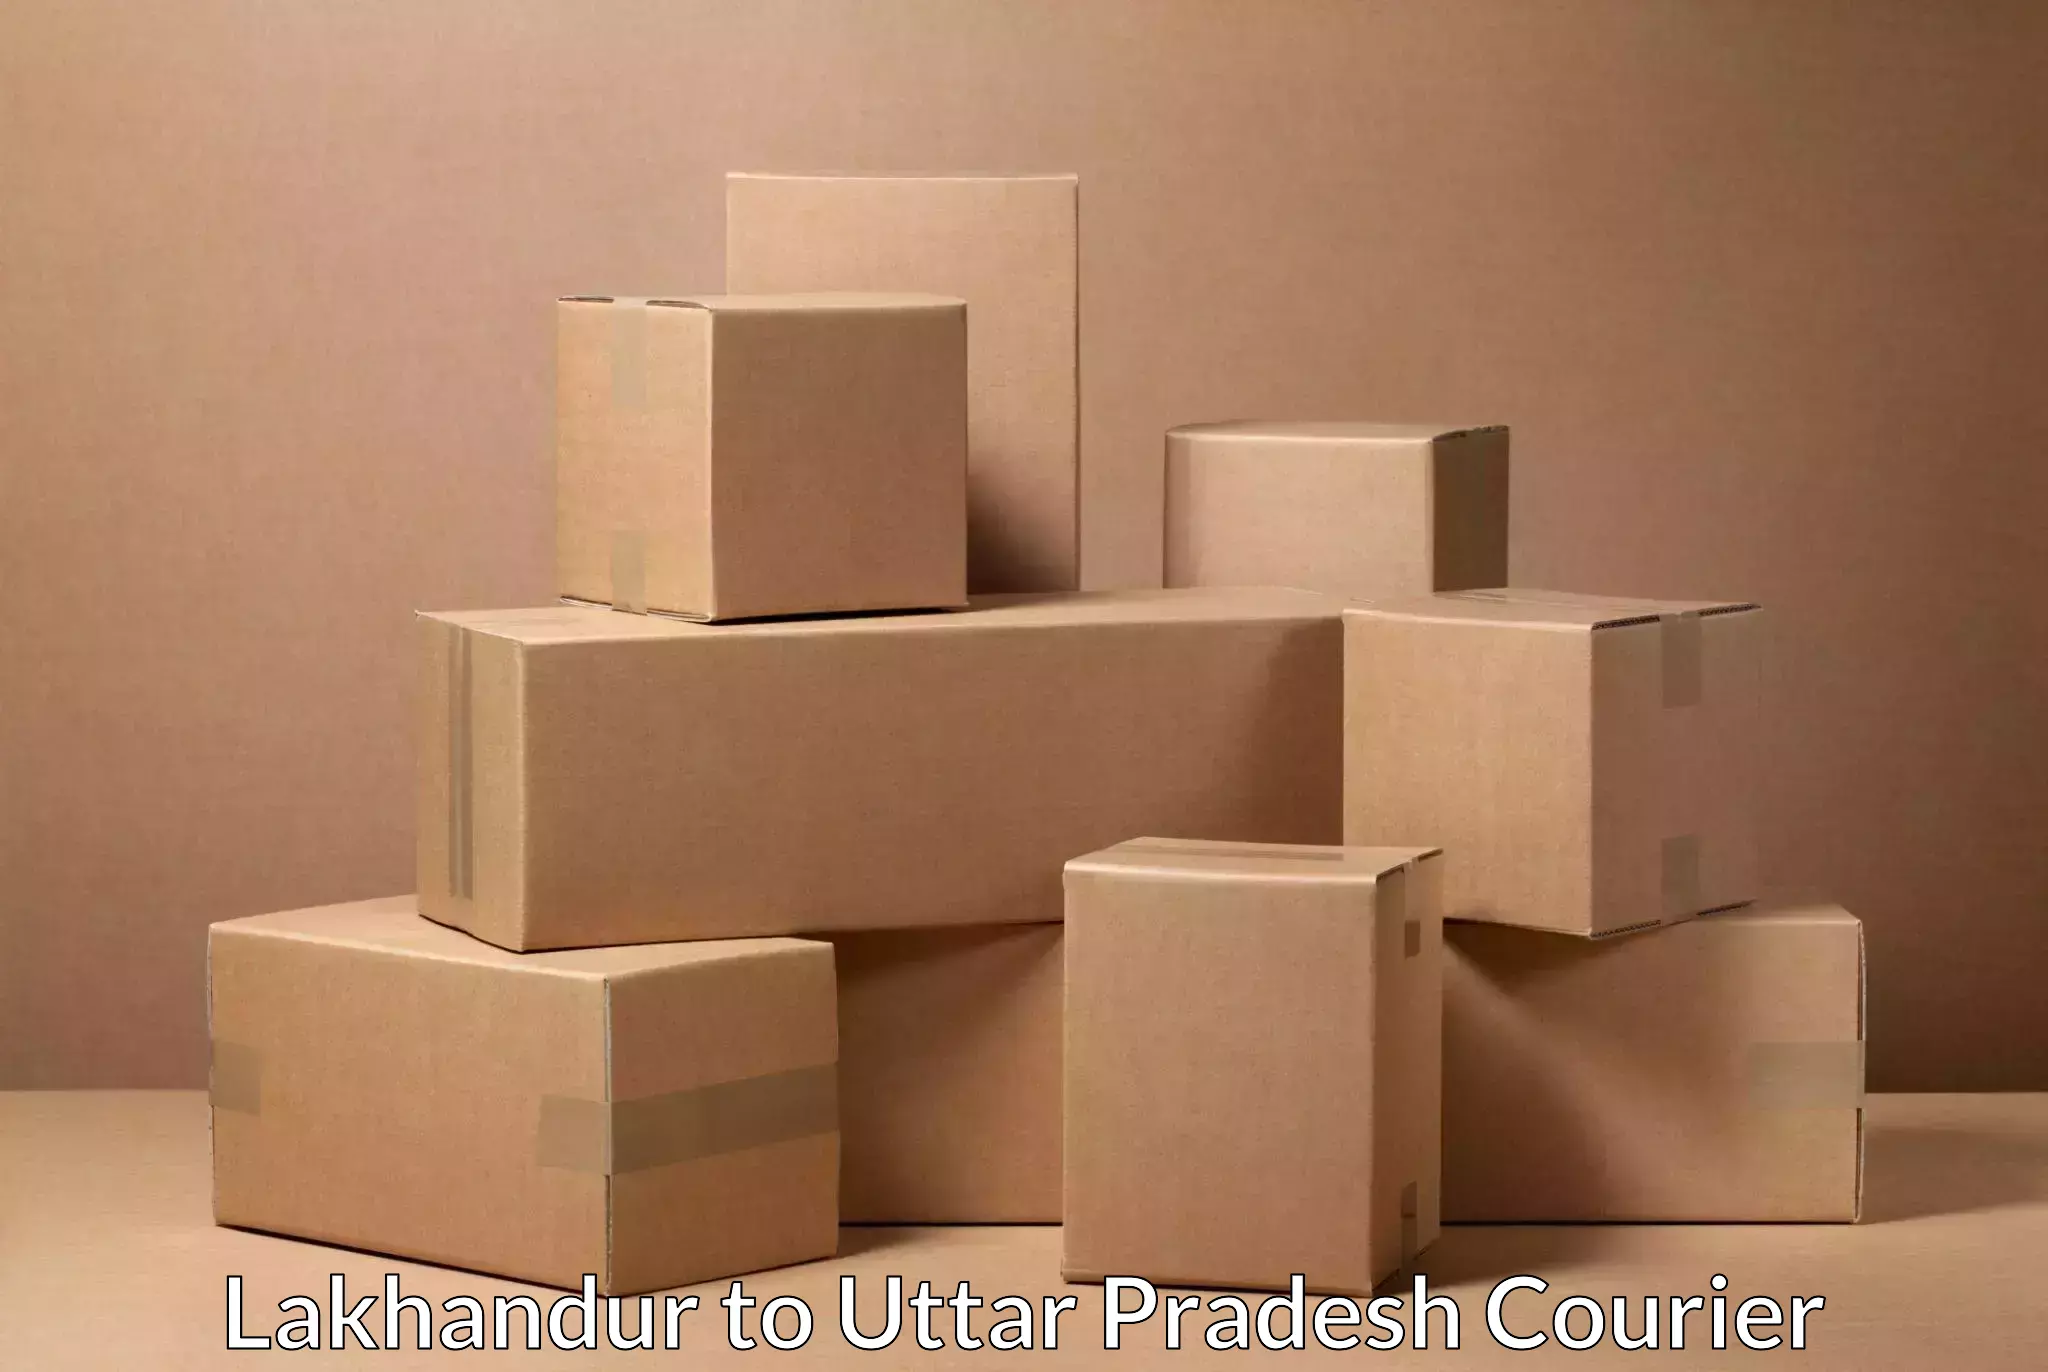 Easy access courier services Lakhandur to Reoti